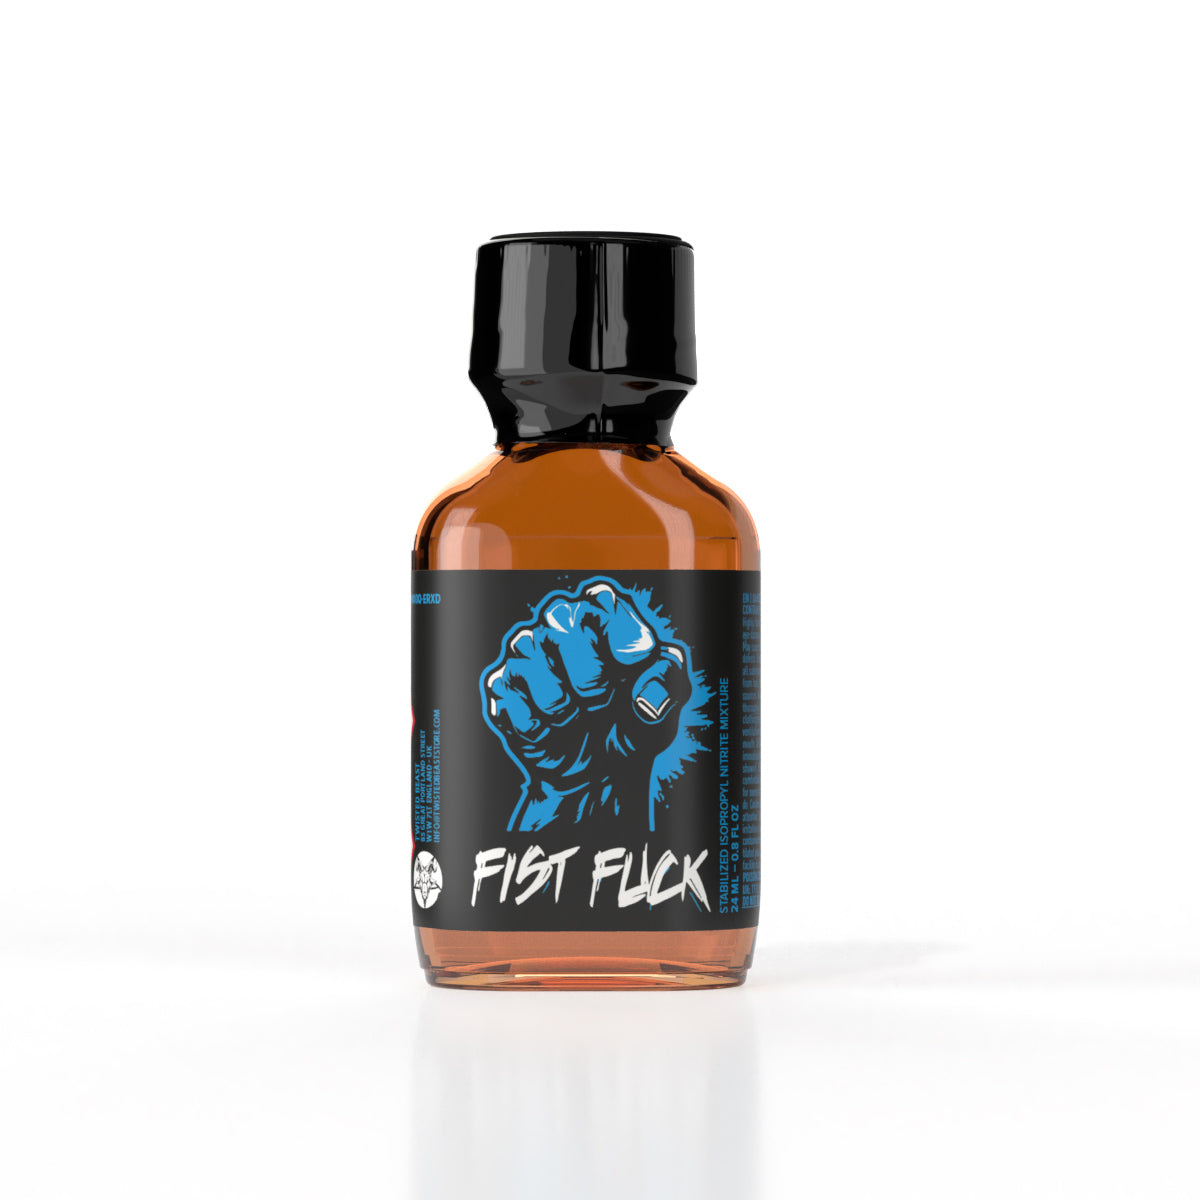 A bottle of Fist Fuck Propyl Poppers by Twisted Beast.